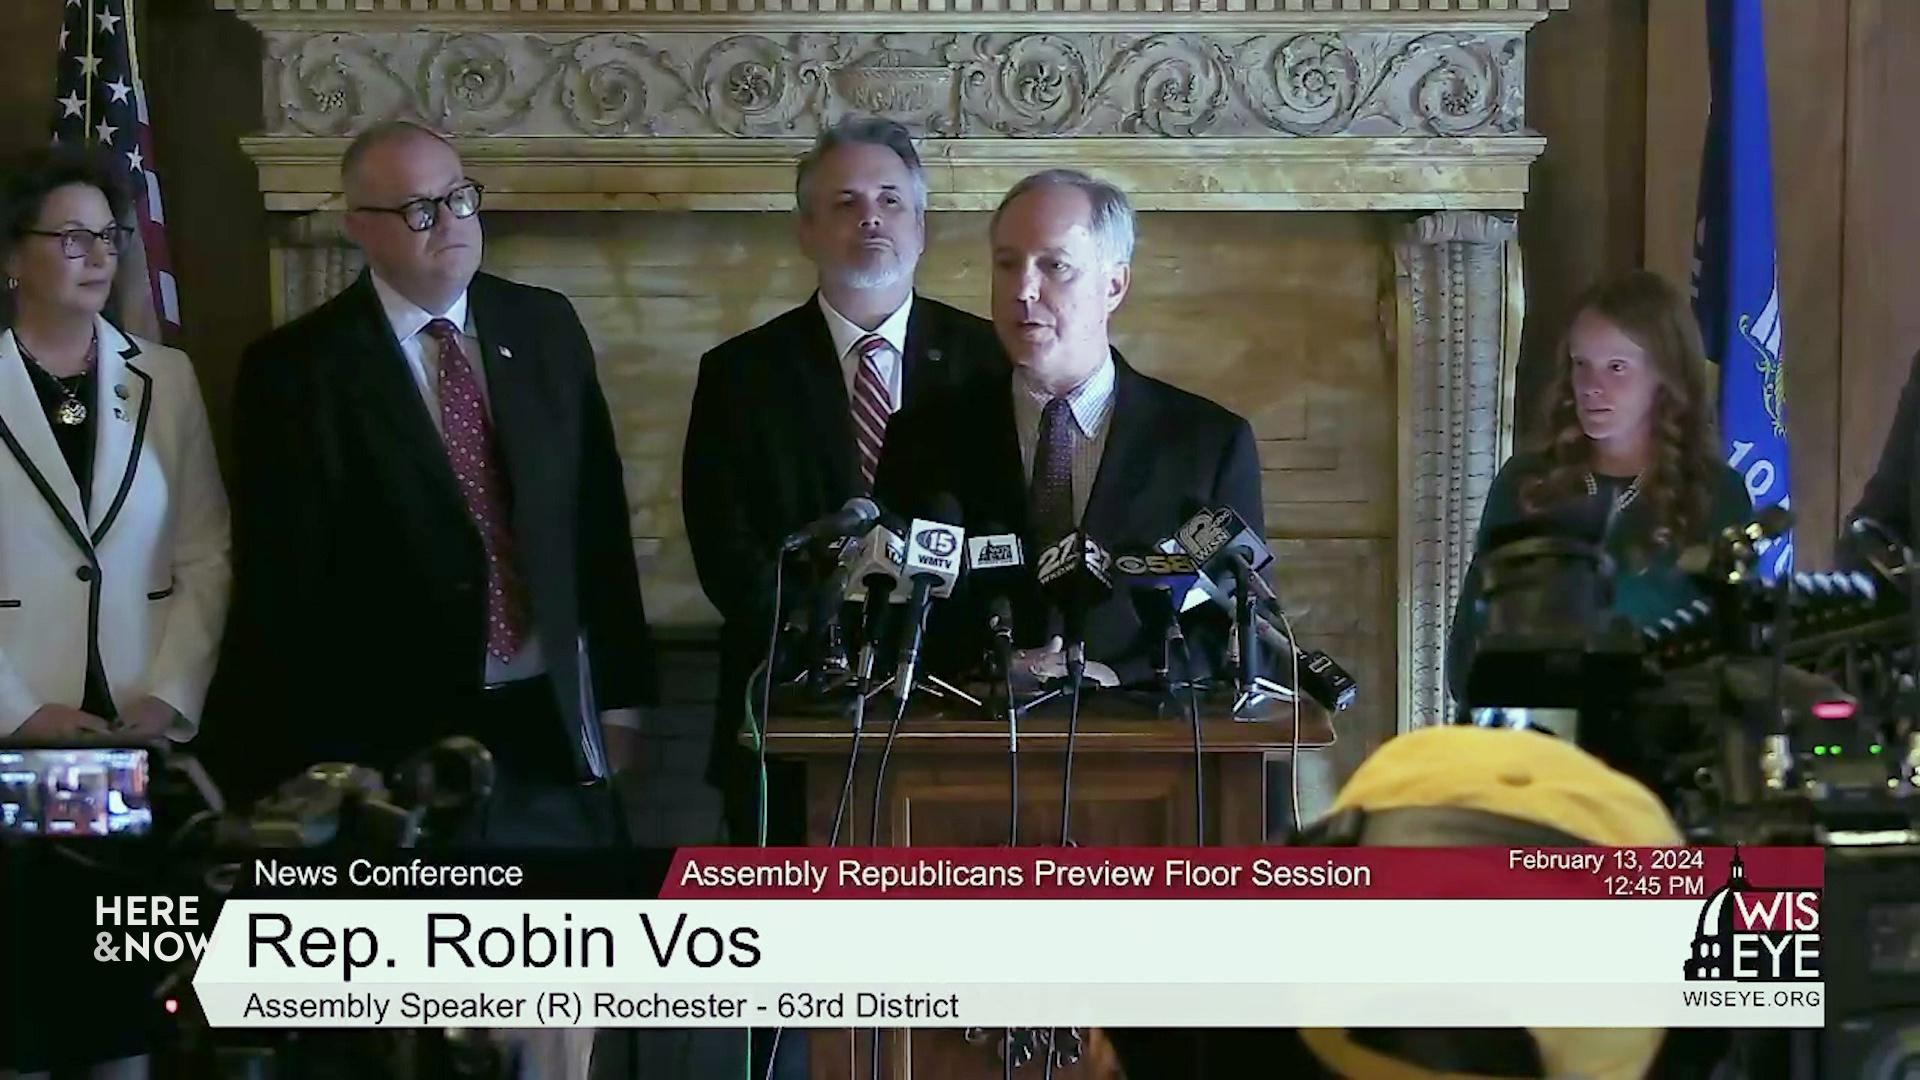 A still image shows Robin Vos standing behind a podium and microphones addressing a room of people with people standing alongside him on either side.